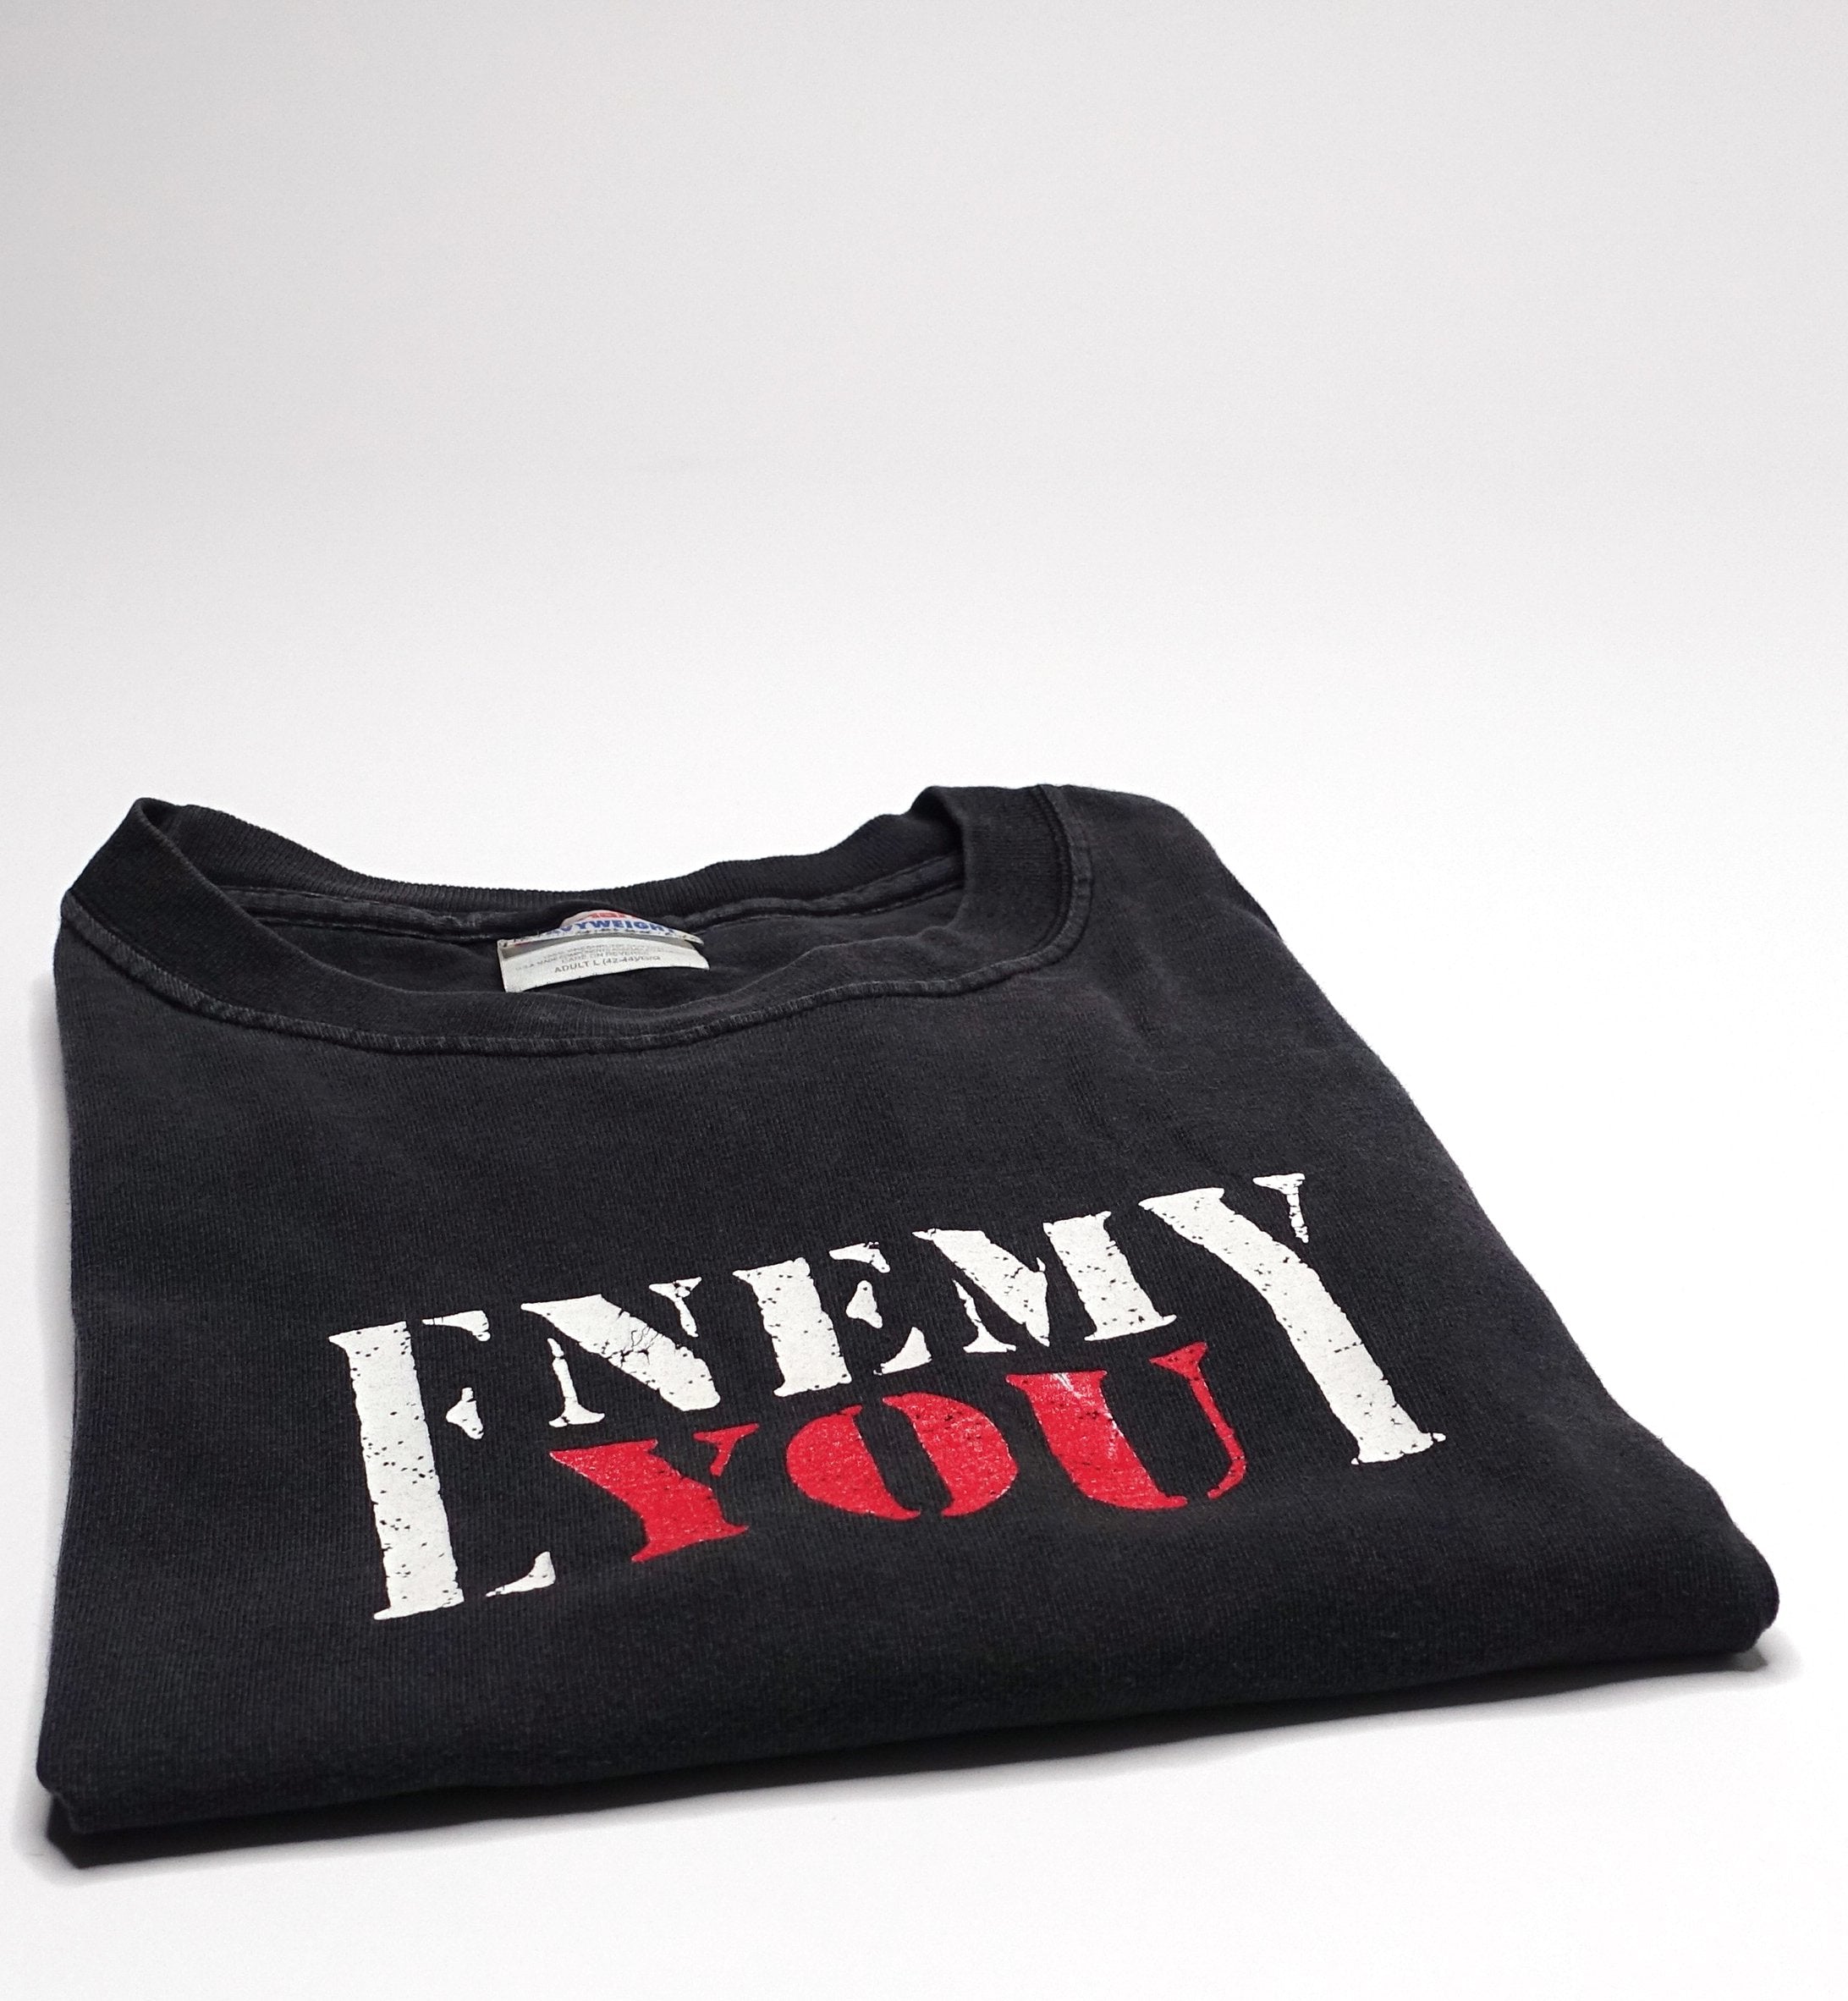 Enemy You - Where No One Knows My Name 2000 Tour Shirt Size Large